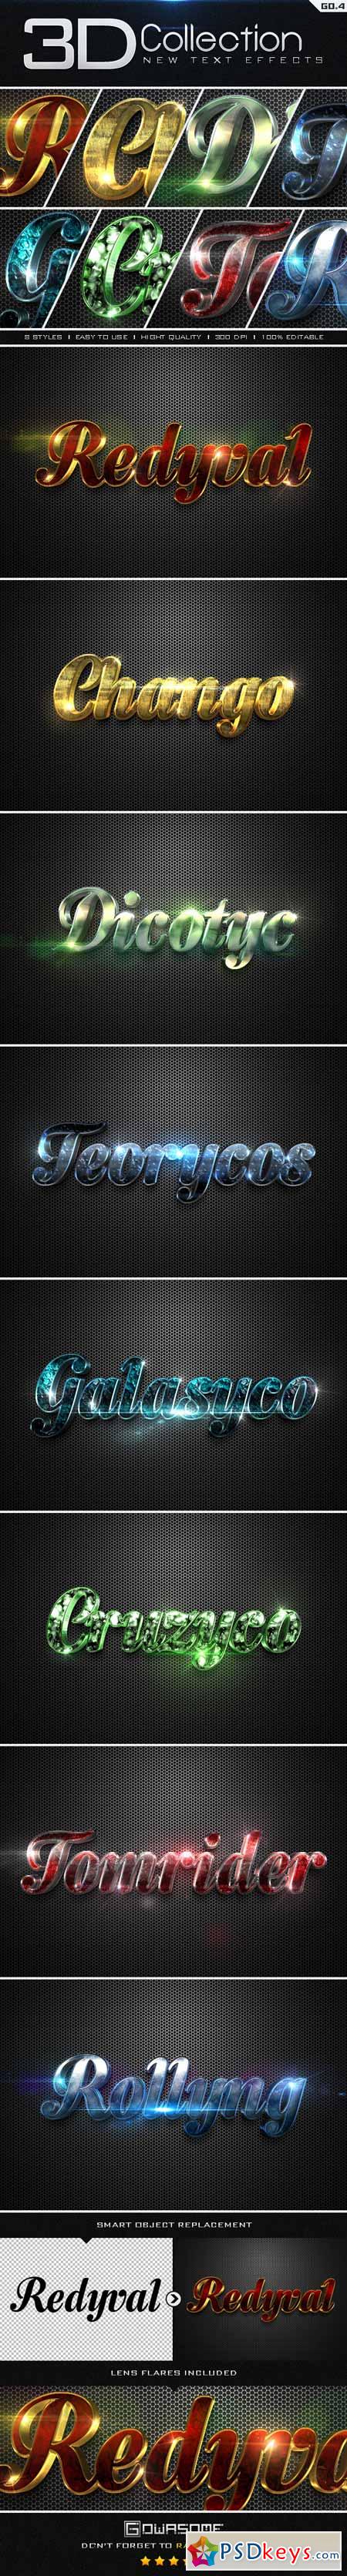 New 3D Collection Text Effects GO.4 9674249